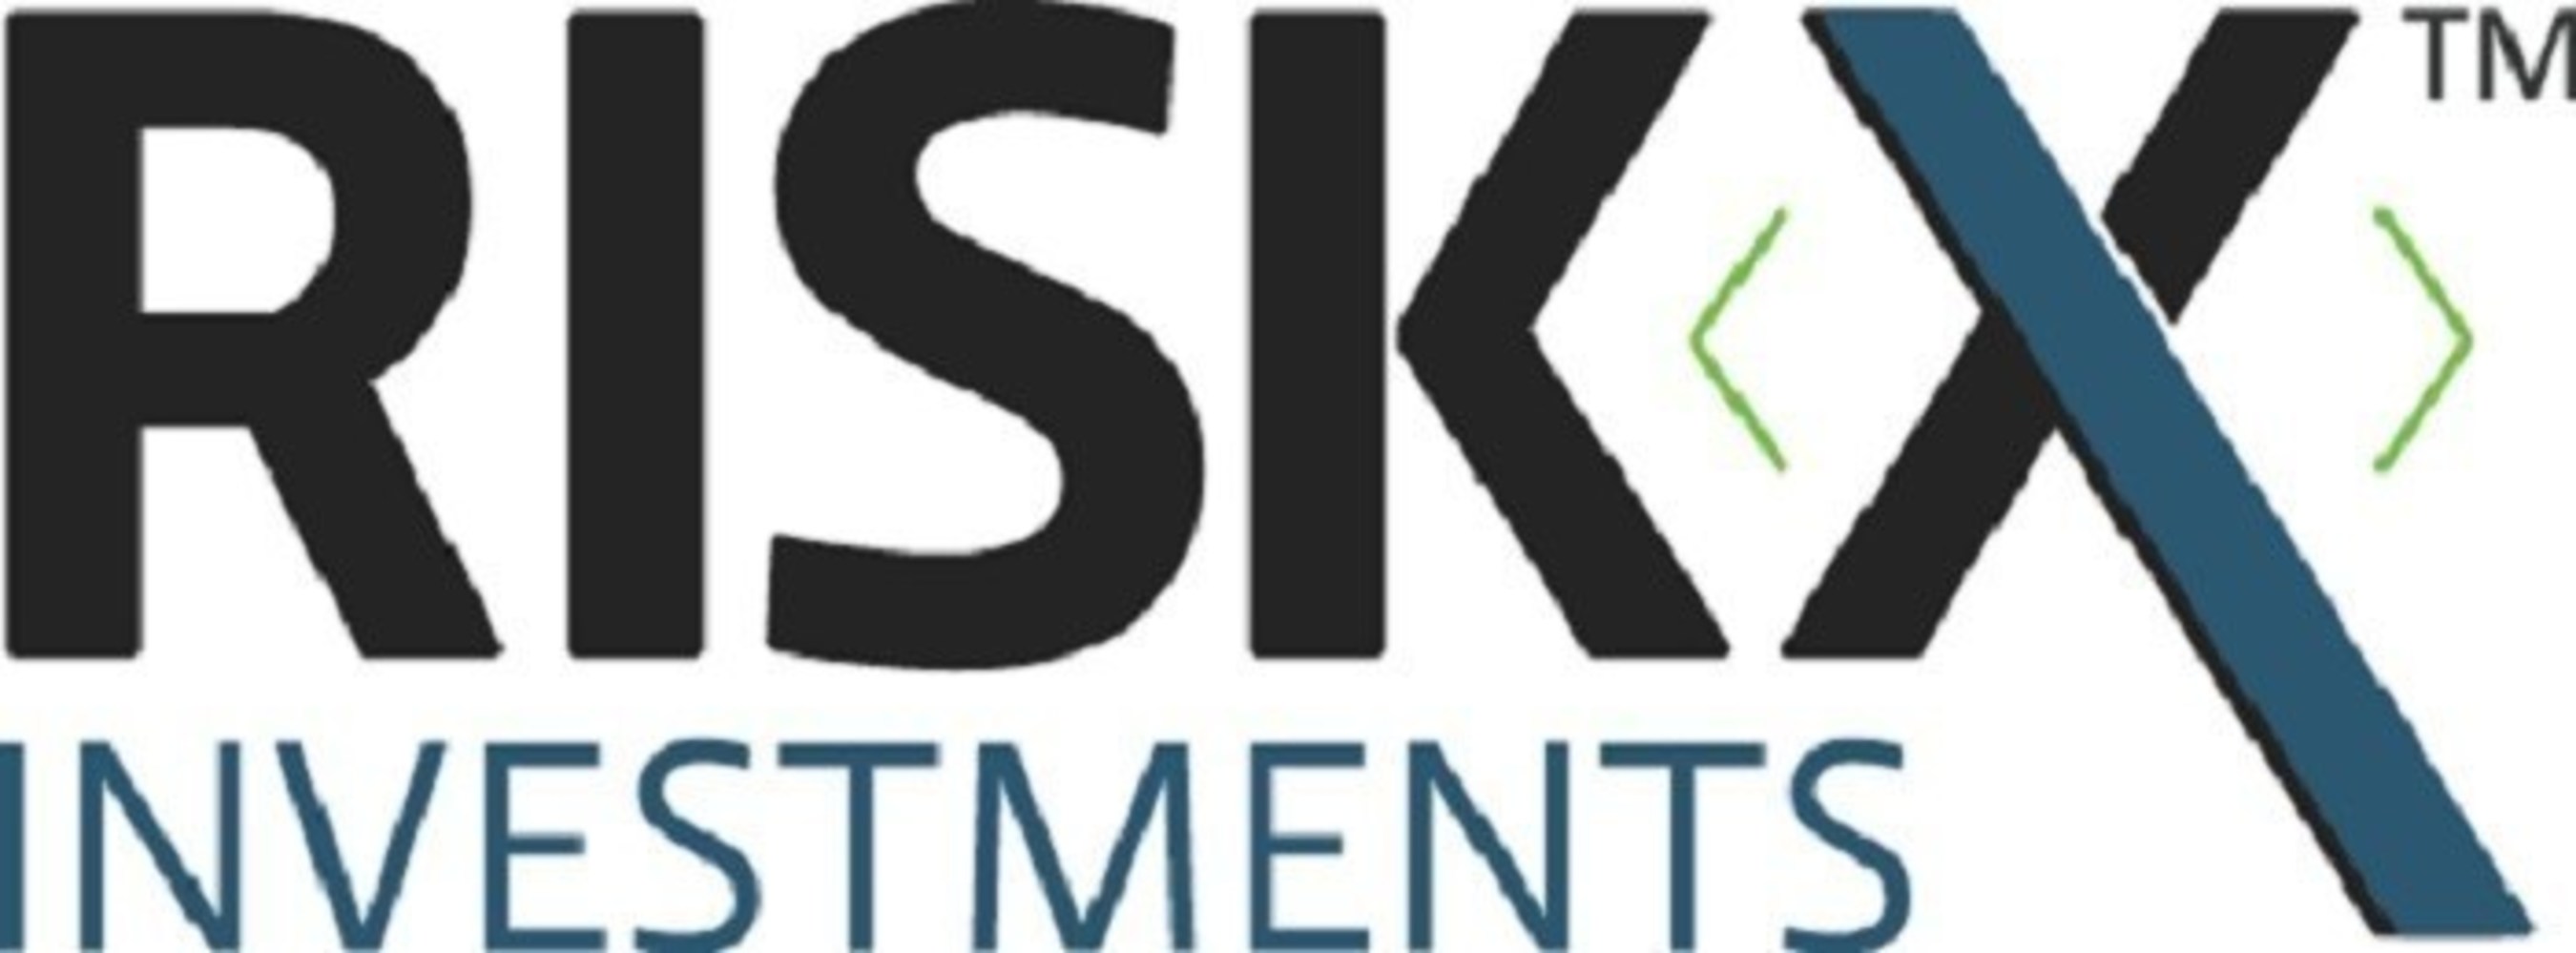 RiskX Investments